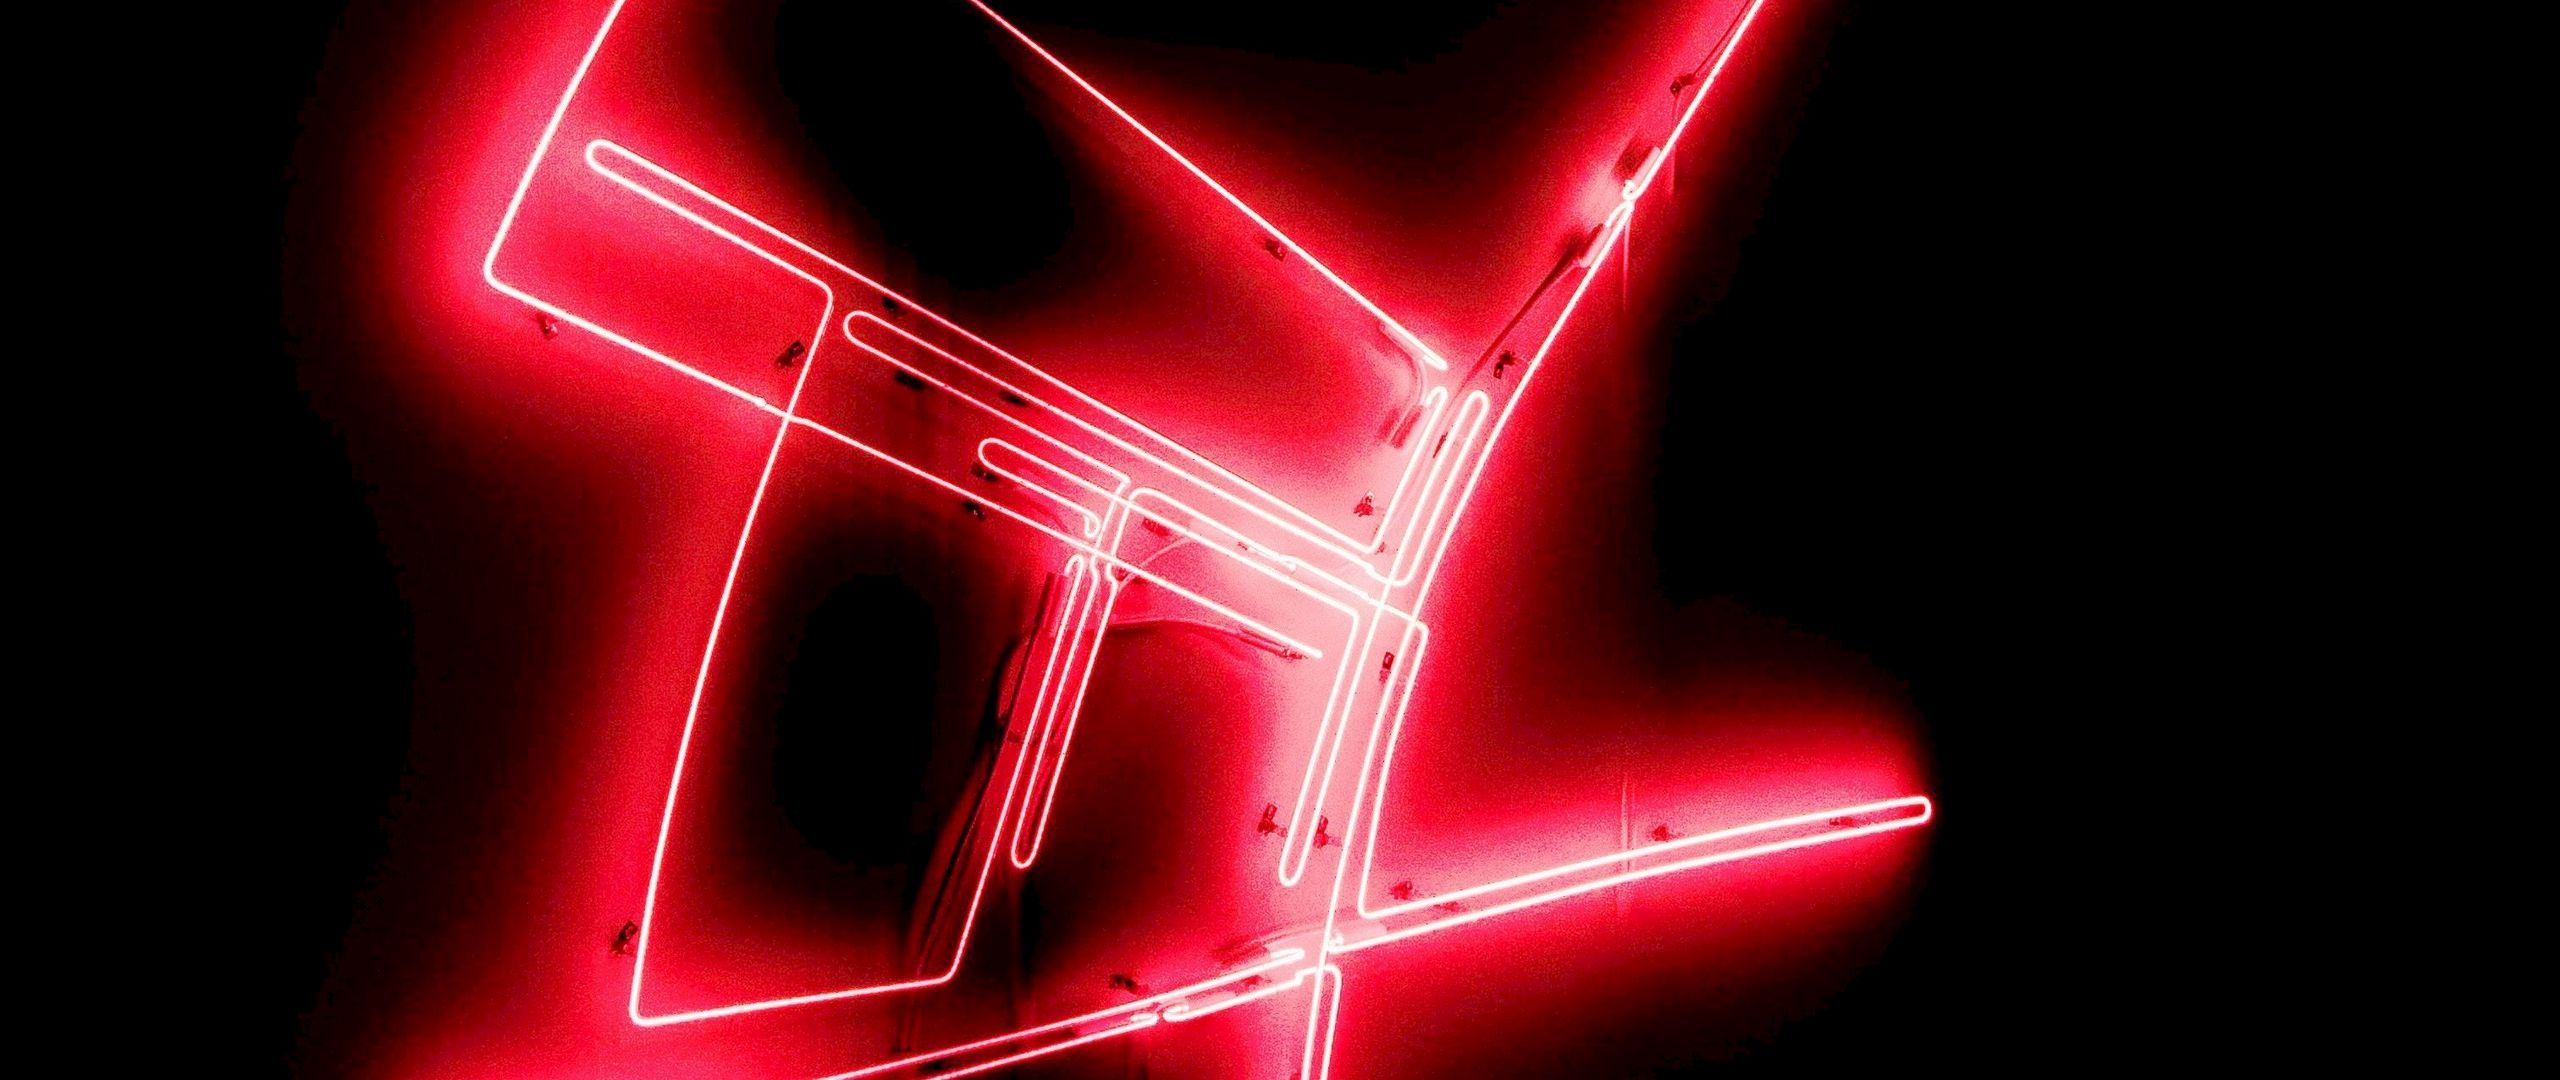 Neon Red Wallpapers 4k Hd Neon Red Backgrounds On Wallpaperbat